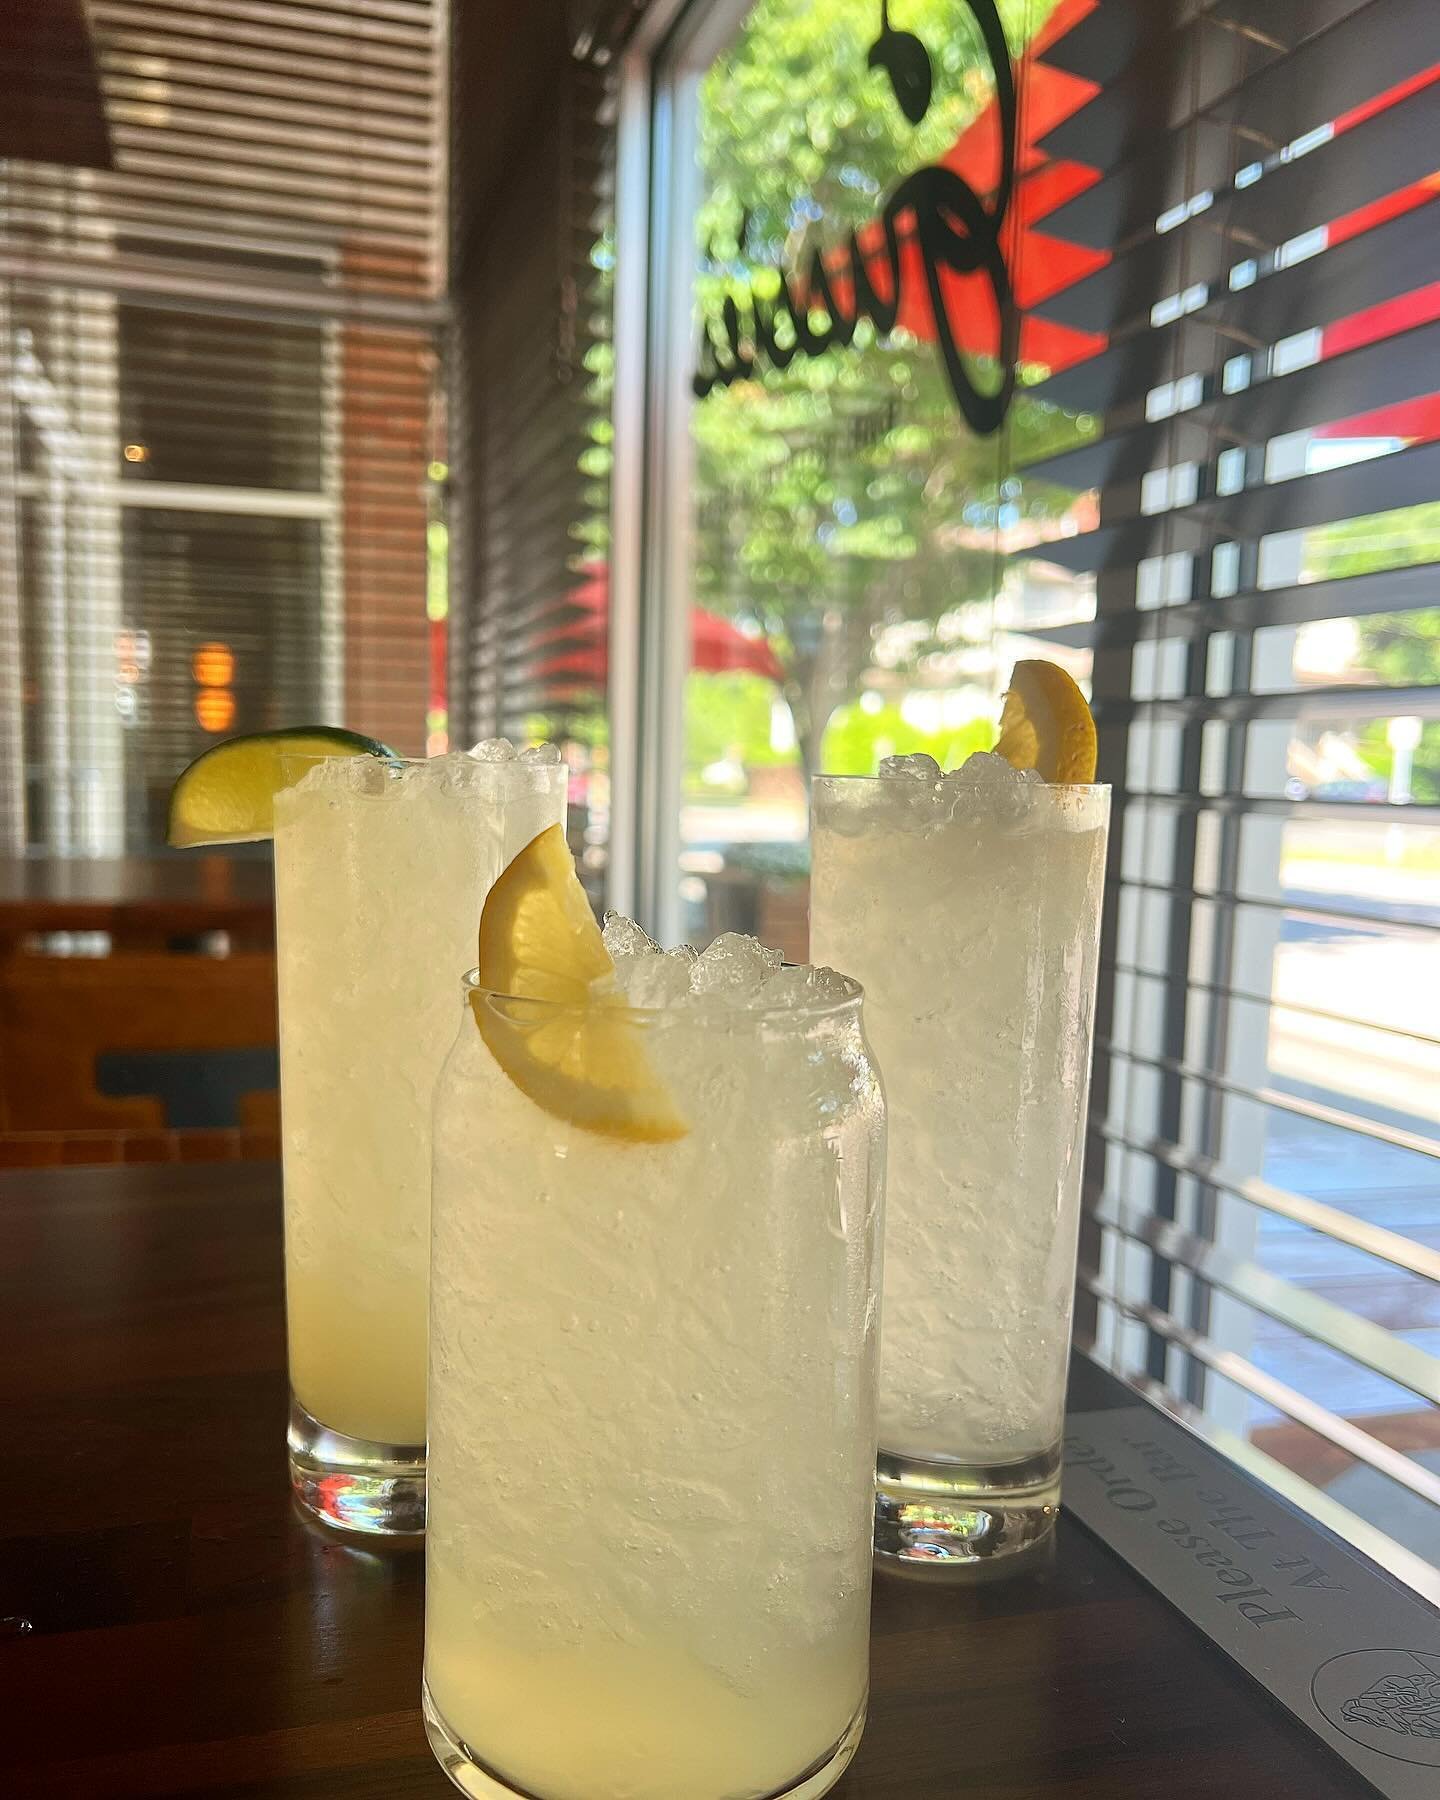 Warm days call for fresh limeade and fresh rosemary lemonade. Enjoy them as is 🍹or choose your own adventure 🚀 and add a shot of house spirit. Cheers! 🦊